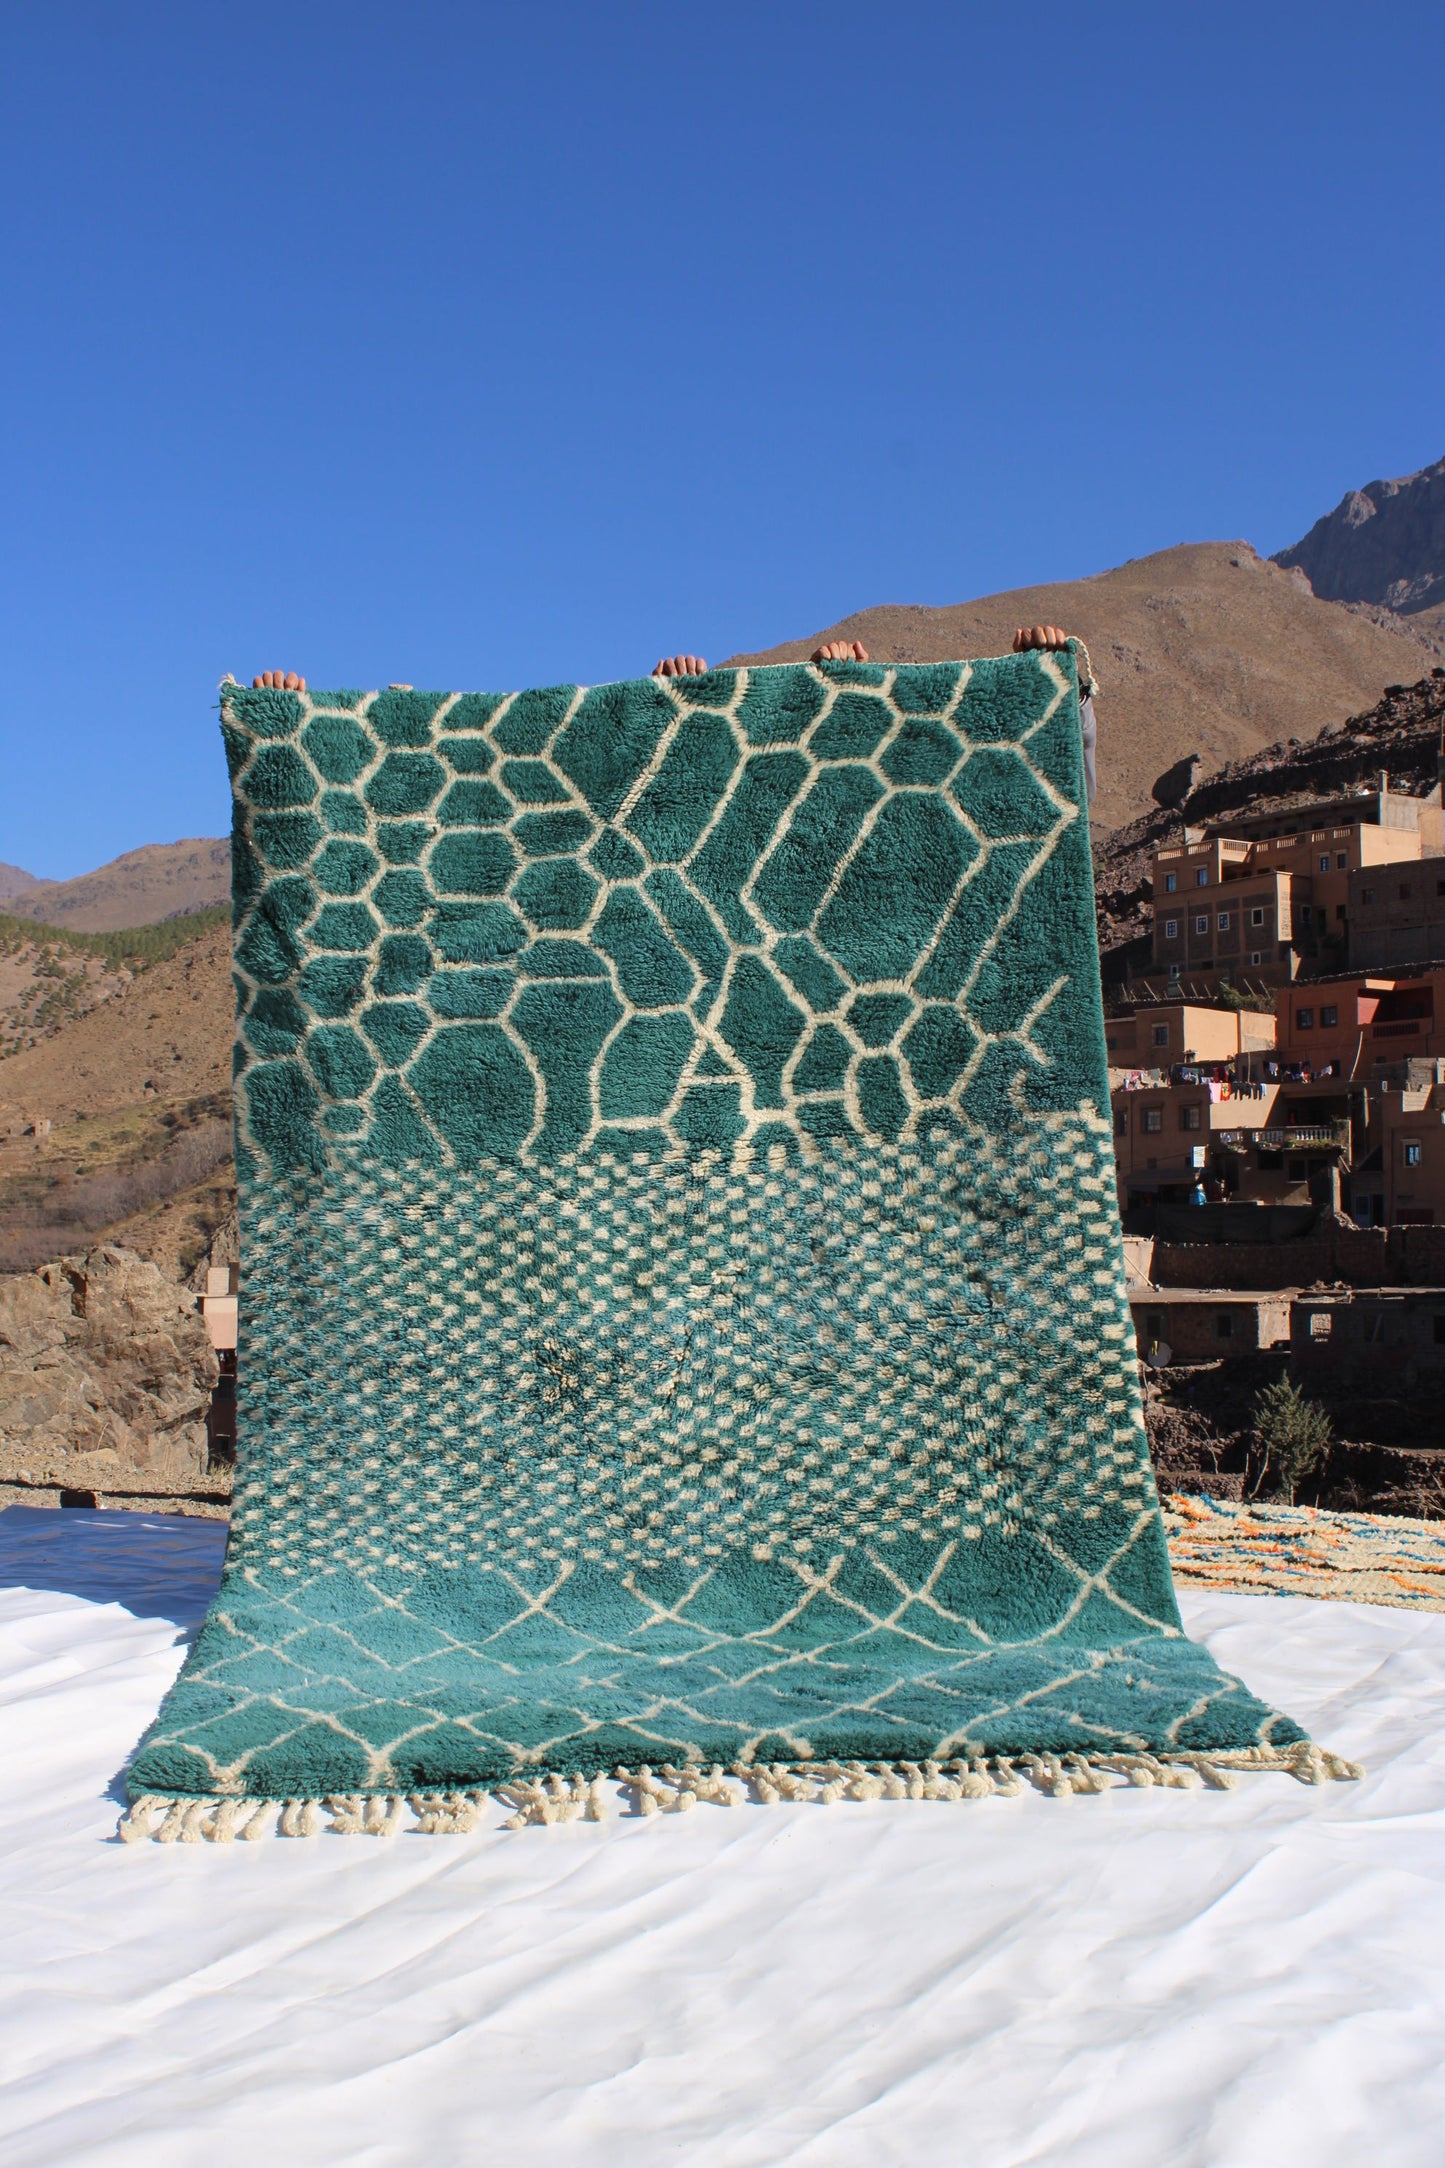 Beni Ourain rugs originate from the Atlas Mountains of Morocco and are characterized by their distinctive, neutral-toned, and geometric designs. These handwoven rugs often feature a plush pile and are made by the Berber tribes,  size is 250x150cm